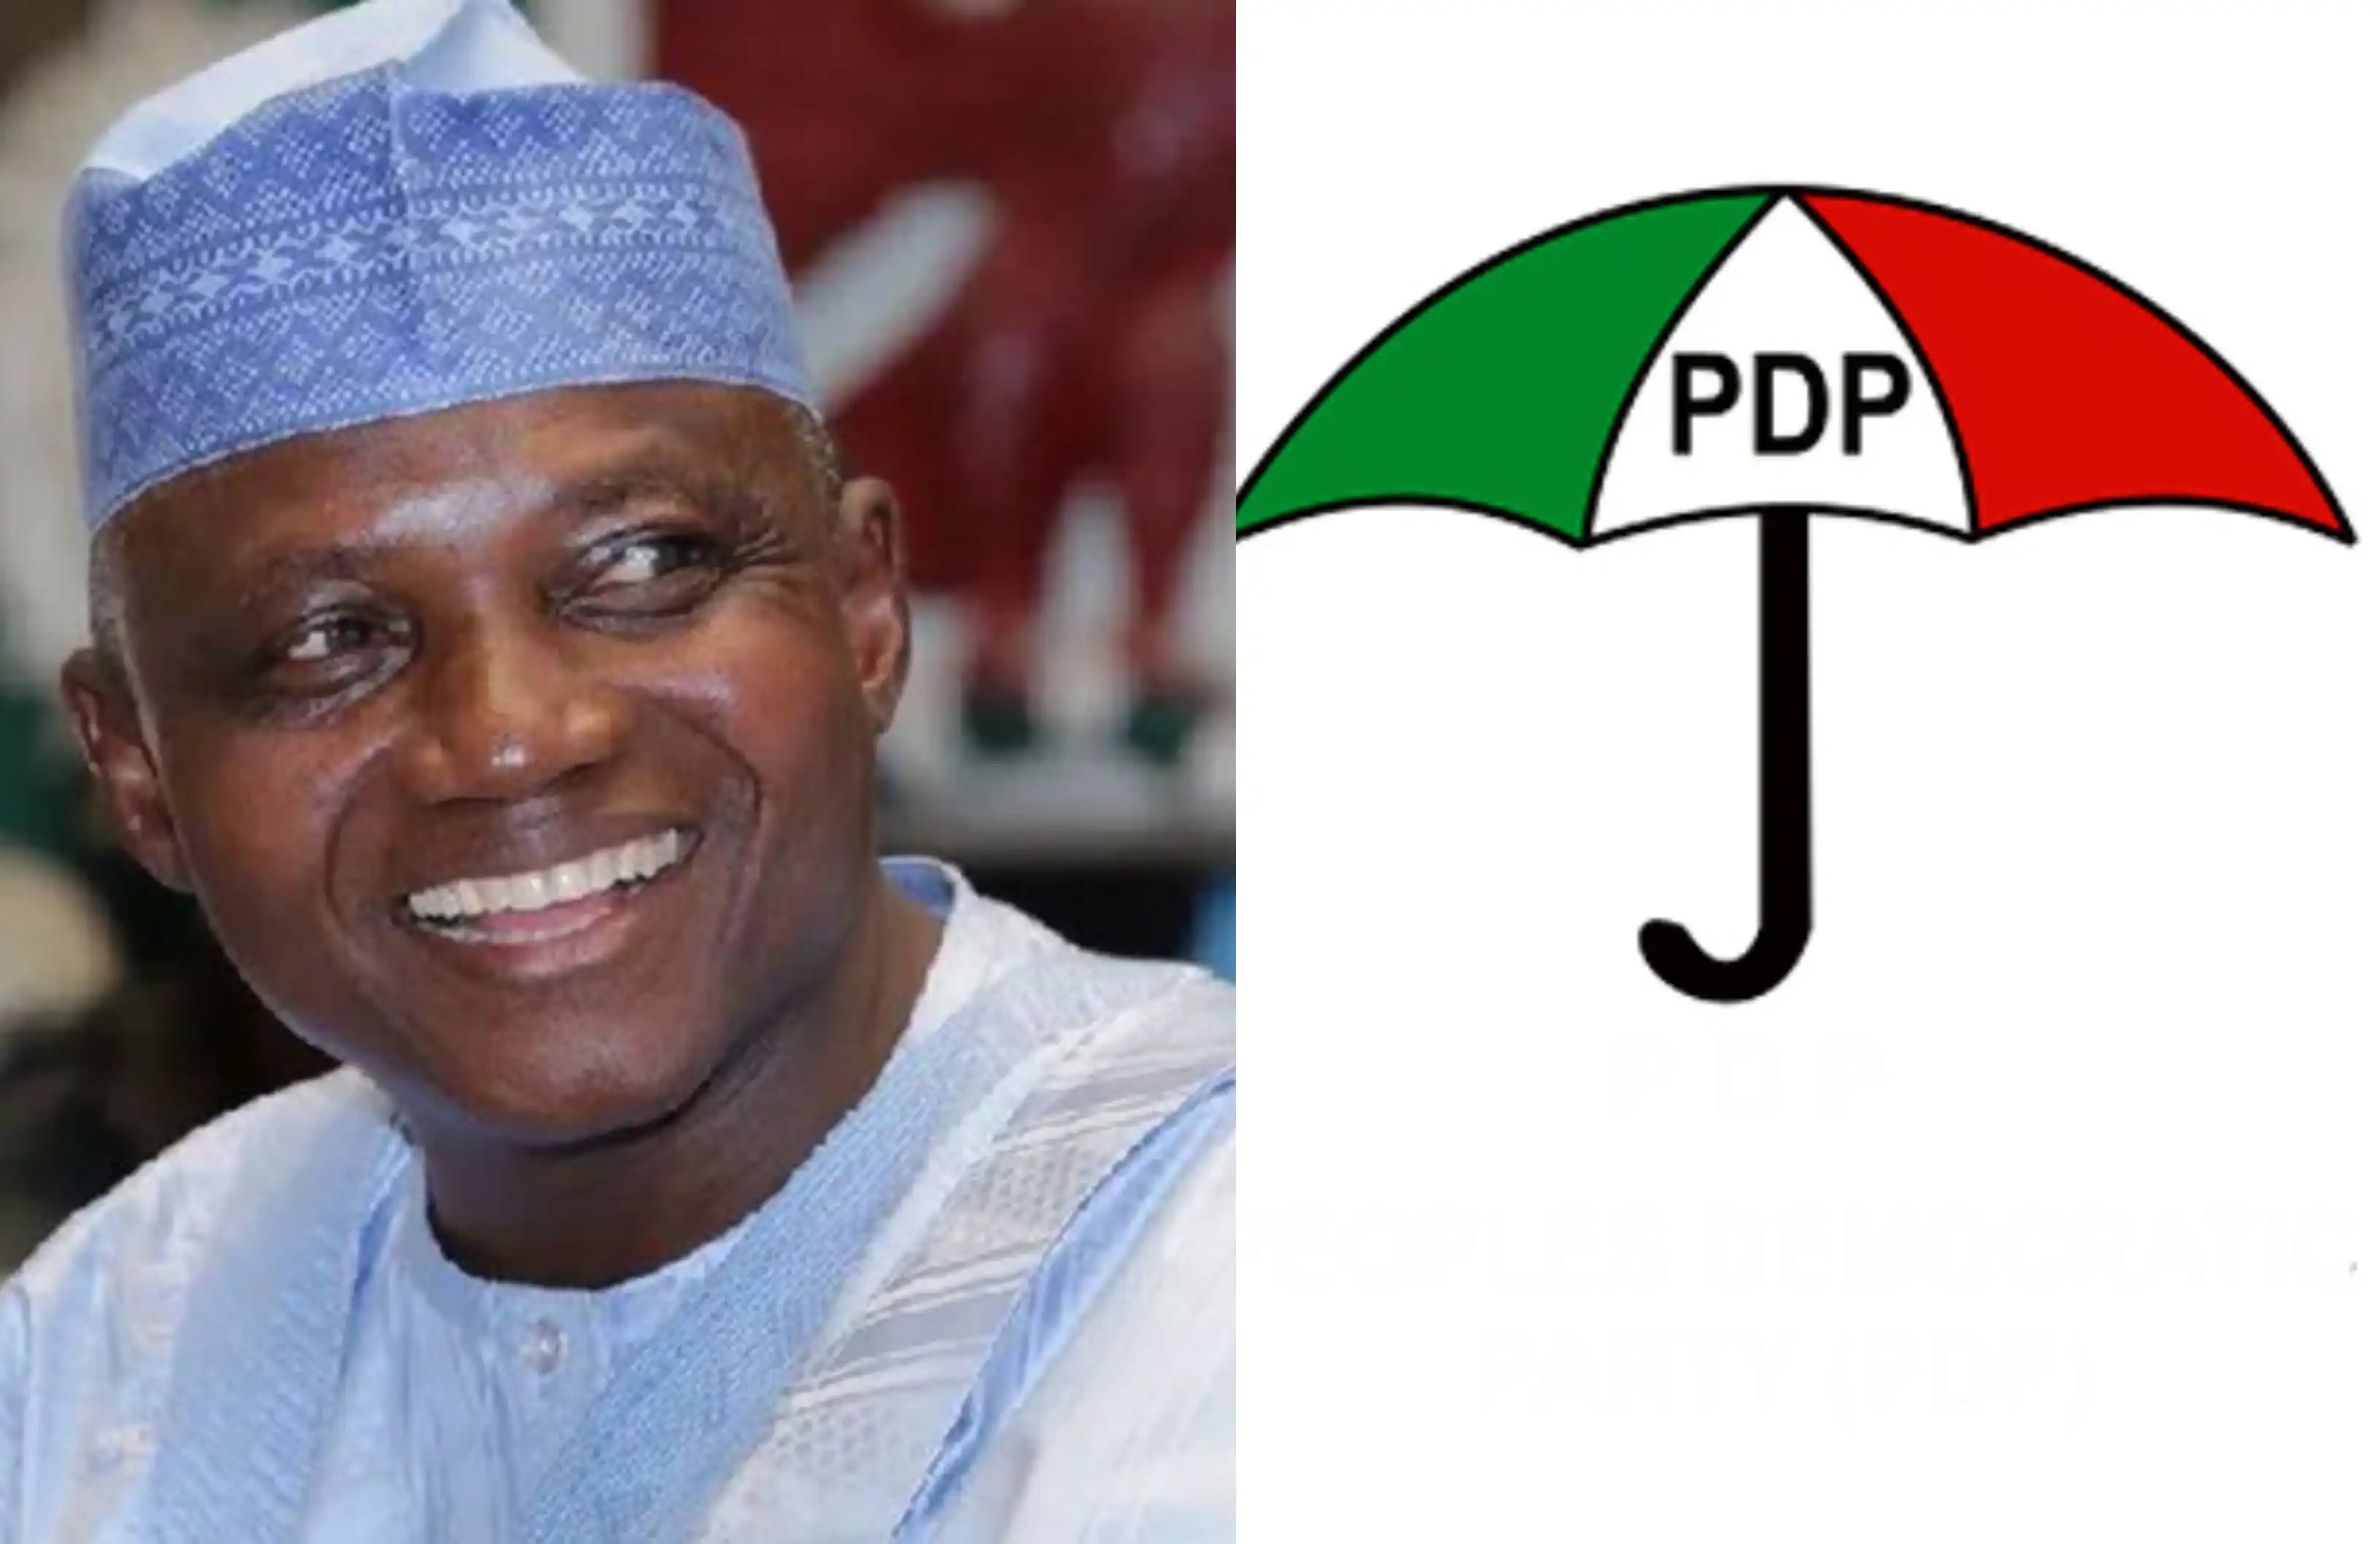 No one can dictate to Buhari where to hold meetings - Garba Shehu fires back at PDP